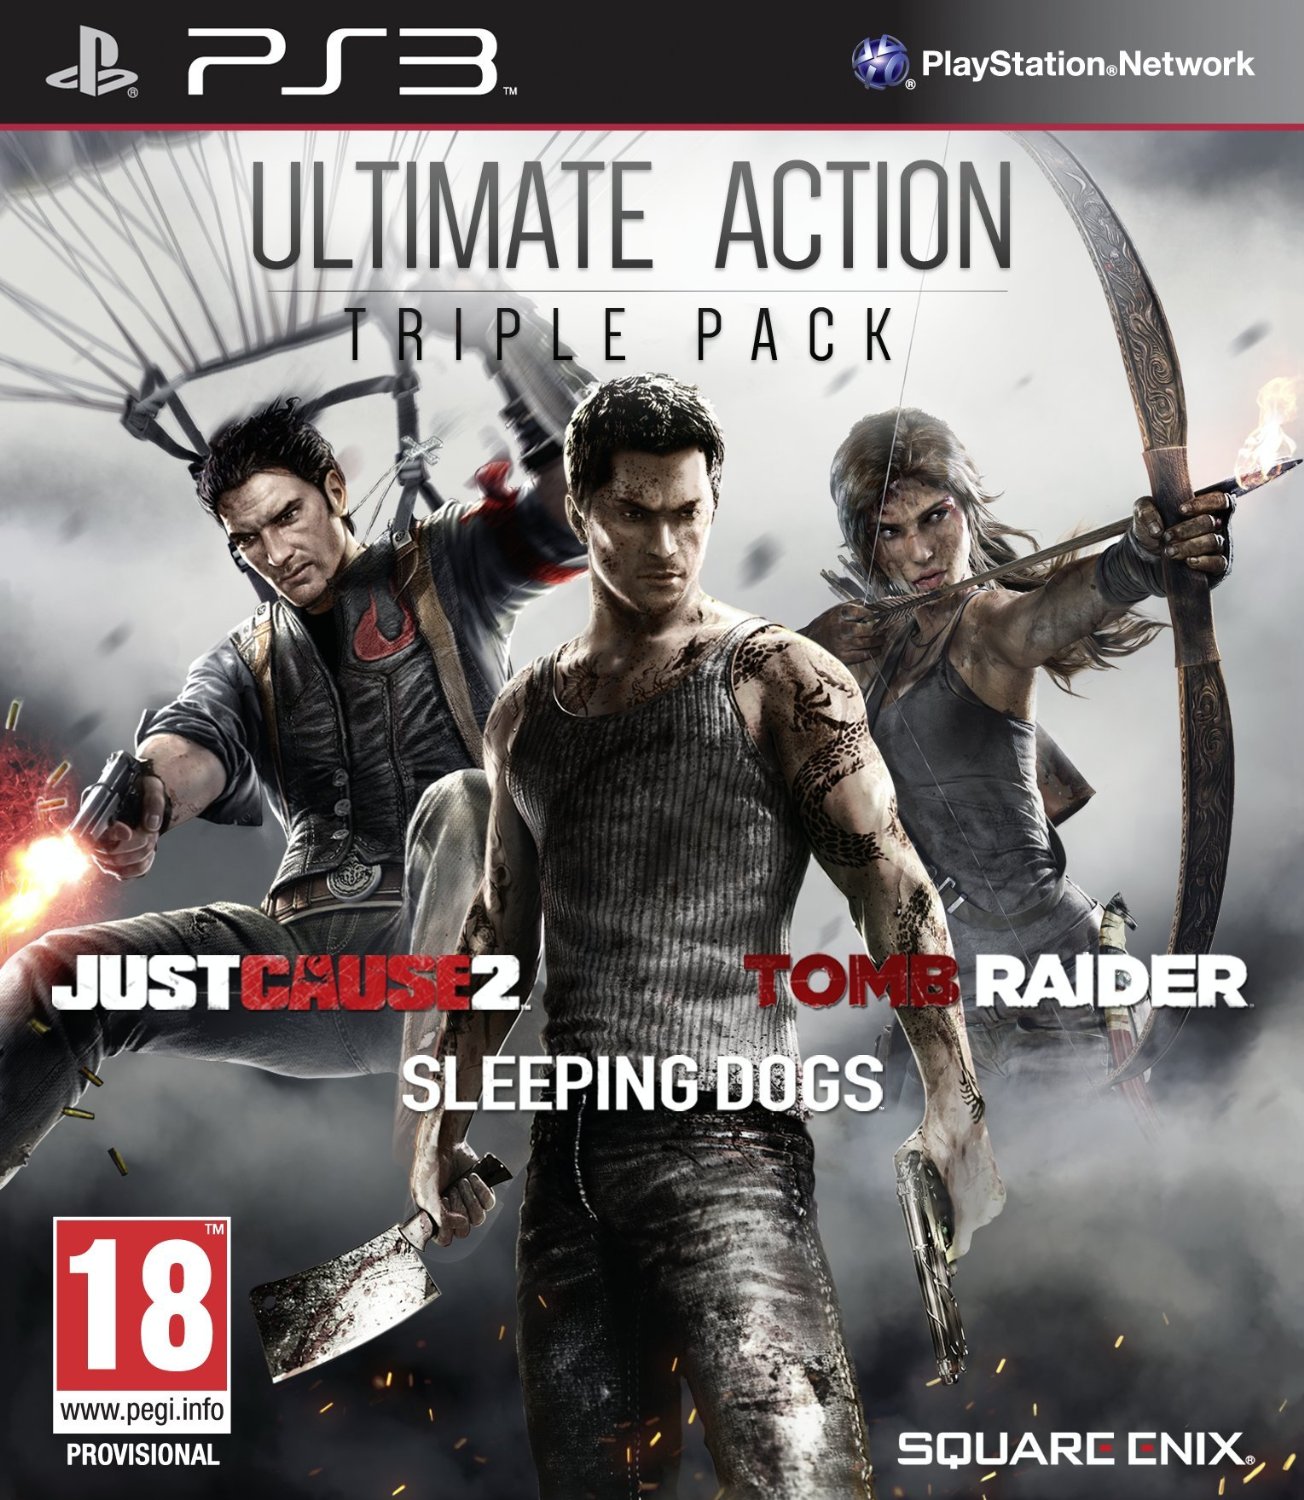 Ultimate Action Triple Pack for PS3 to buy